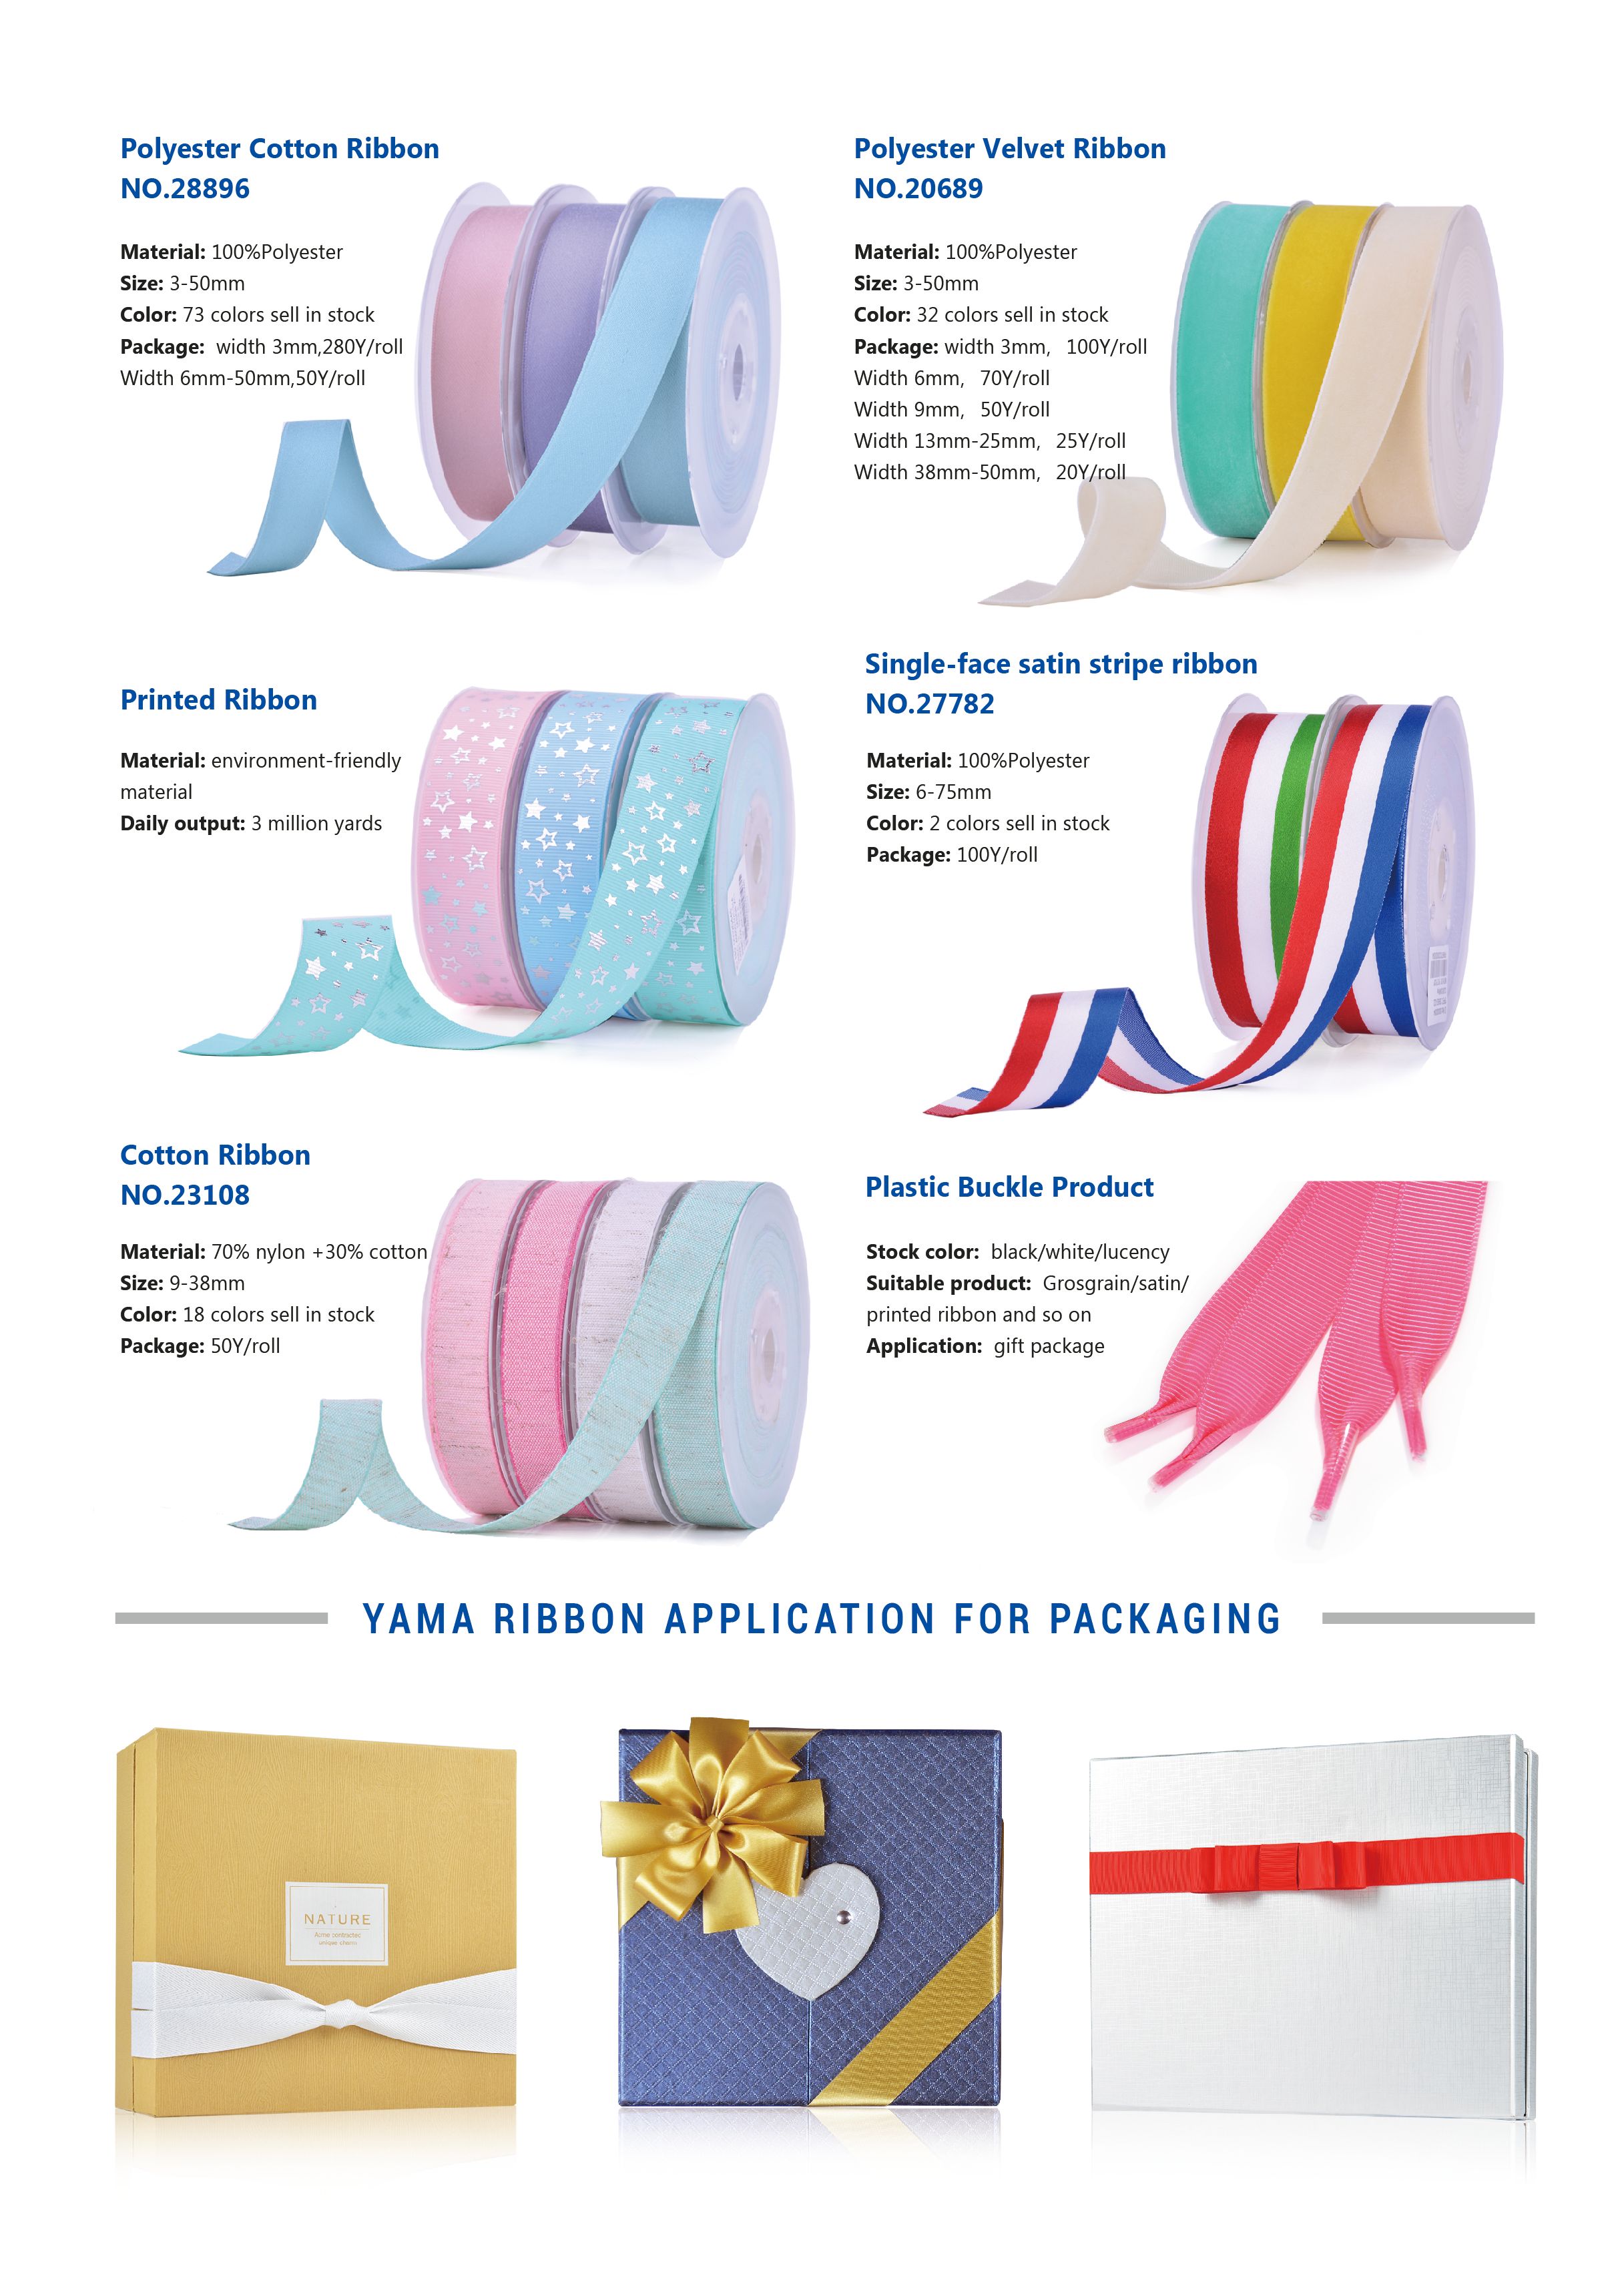 YAMA RIBBON APPLICATION FOR PACKAGING